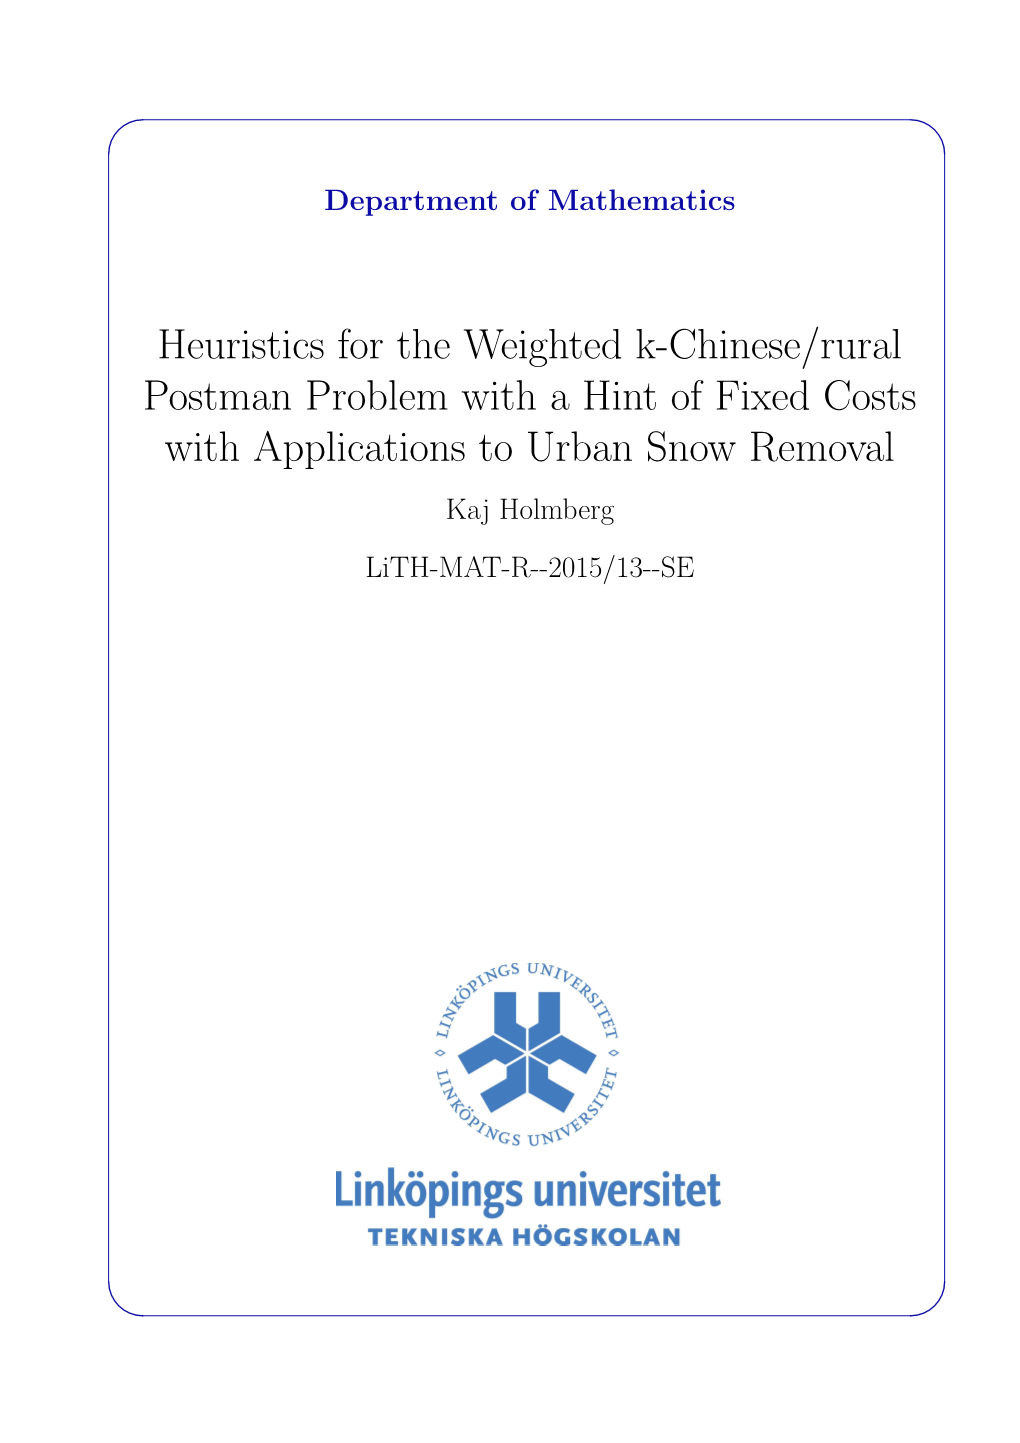 Heuristics for the Weighted K-Chinese/Rural Postman Problem with a Hint of Fixed Costs with Applications to Urban Snow Removal Kaj Holmberg Lith-MAT-R--2015/13--SE